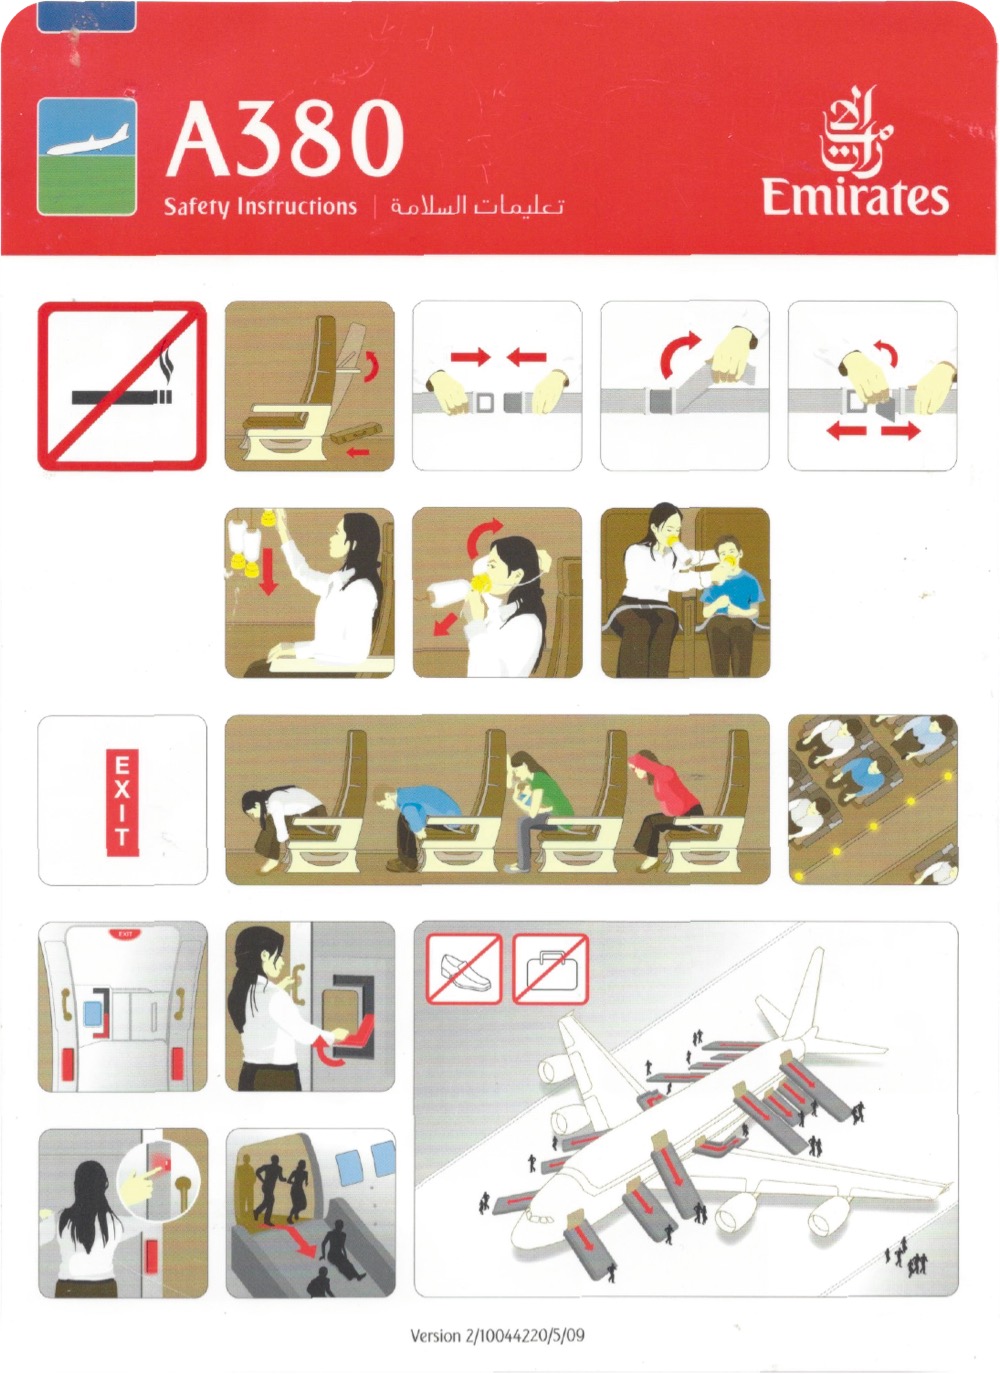 seatback safety card for Emirates